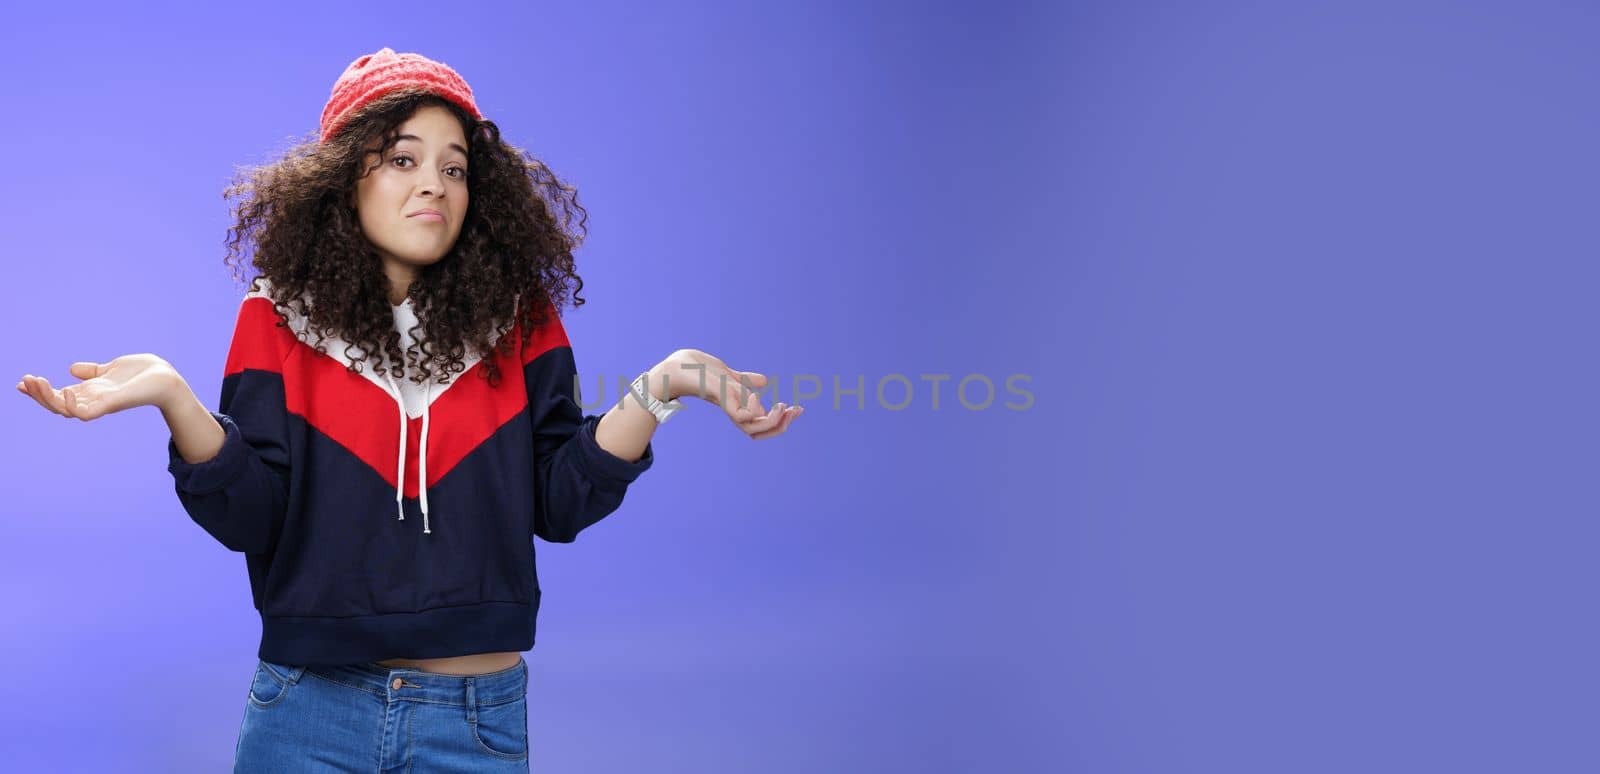 Upset girl cannot get clue what happened shrugging turning away as pouting feeling questioned and unsure what answer, standing clueless and puzzled in sweatshirt and stylish hat over blue background.